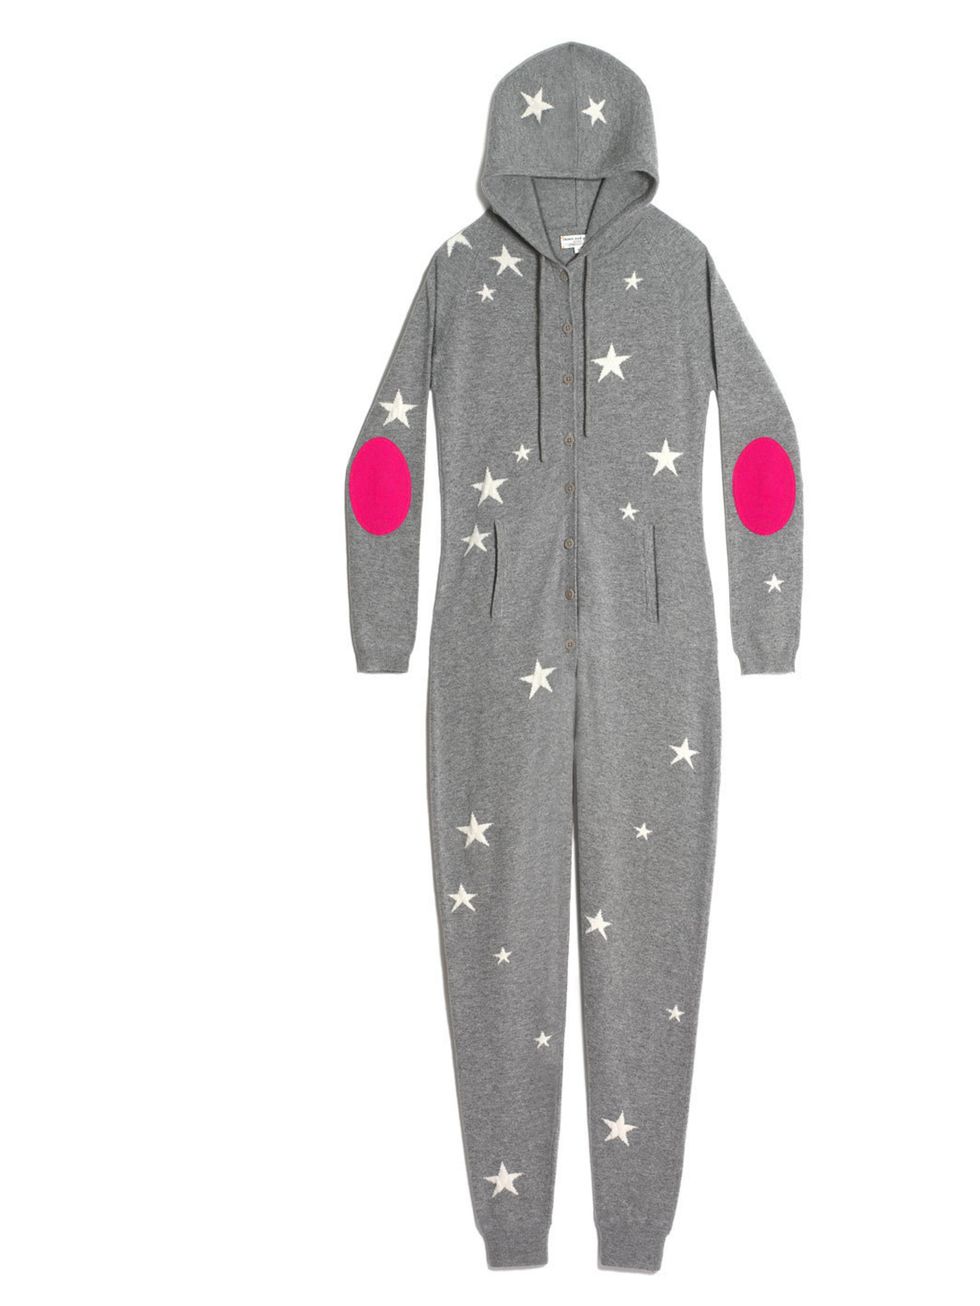 <p>Chinti and Parker cashmere onesie, £495 from <a href="http://www.net-a-porter.com/product/414358">net-a-porter.com</a></p>